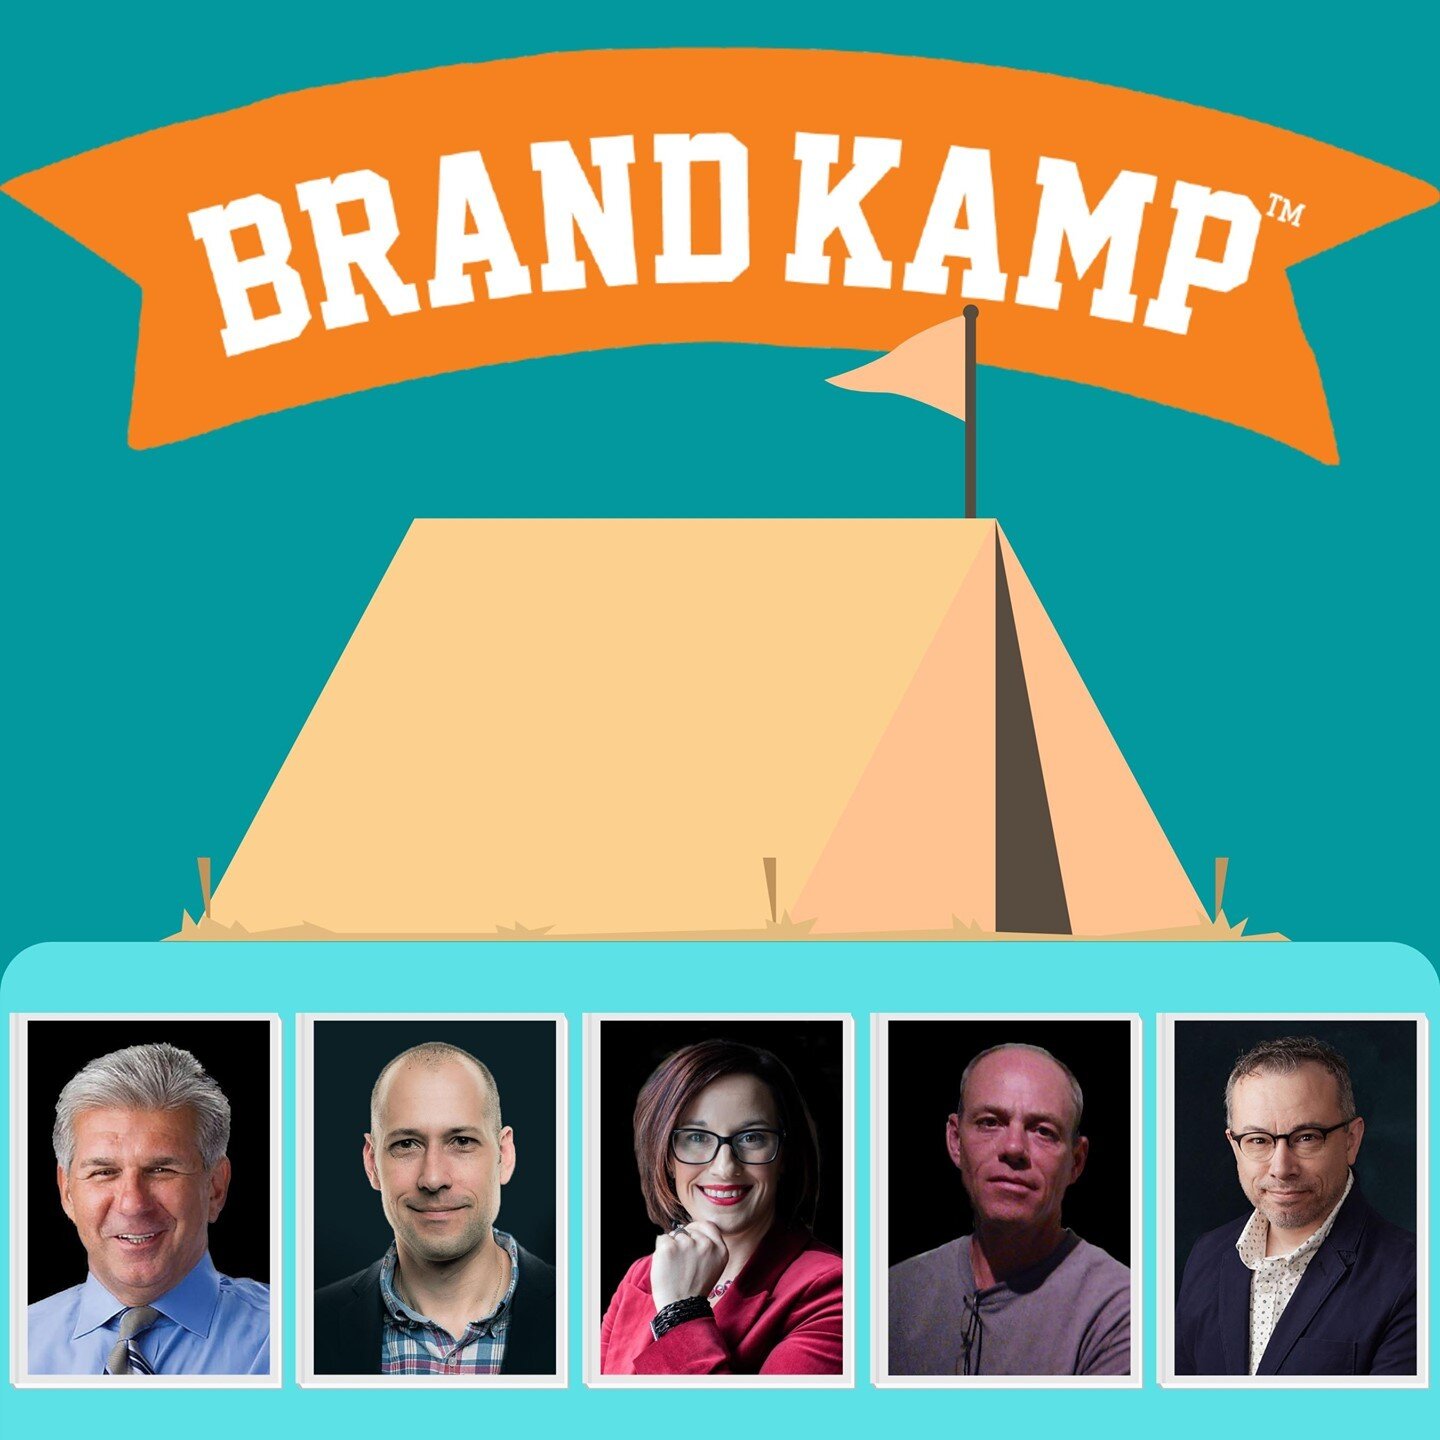 Join 4 Marketing Minds under one tent as your Kamp Kounselors on a marketing &ldquo;Kamp Out.&rdquo; Your journey will build a 3-year strategic marketing system to get your business back on track!
www.brandkamp.org

#Brandsformation #BrandKamp #marke